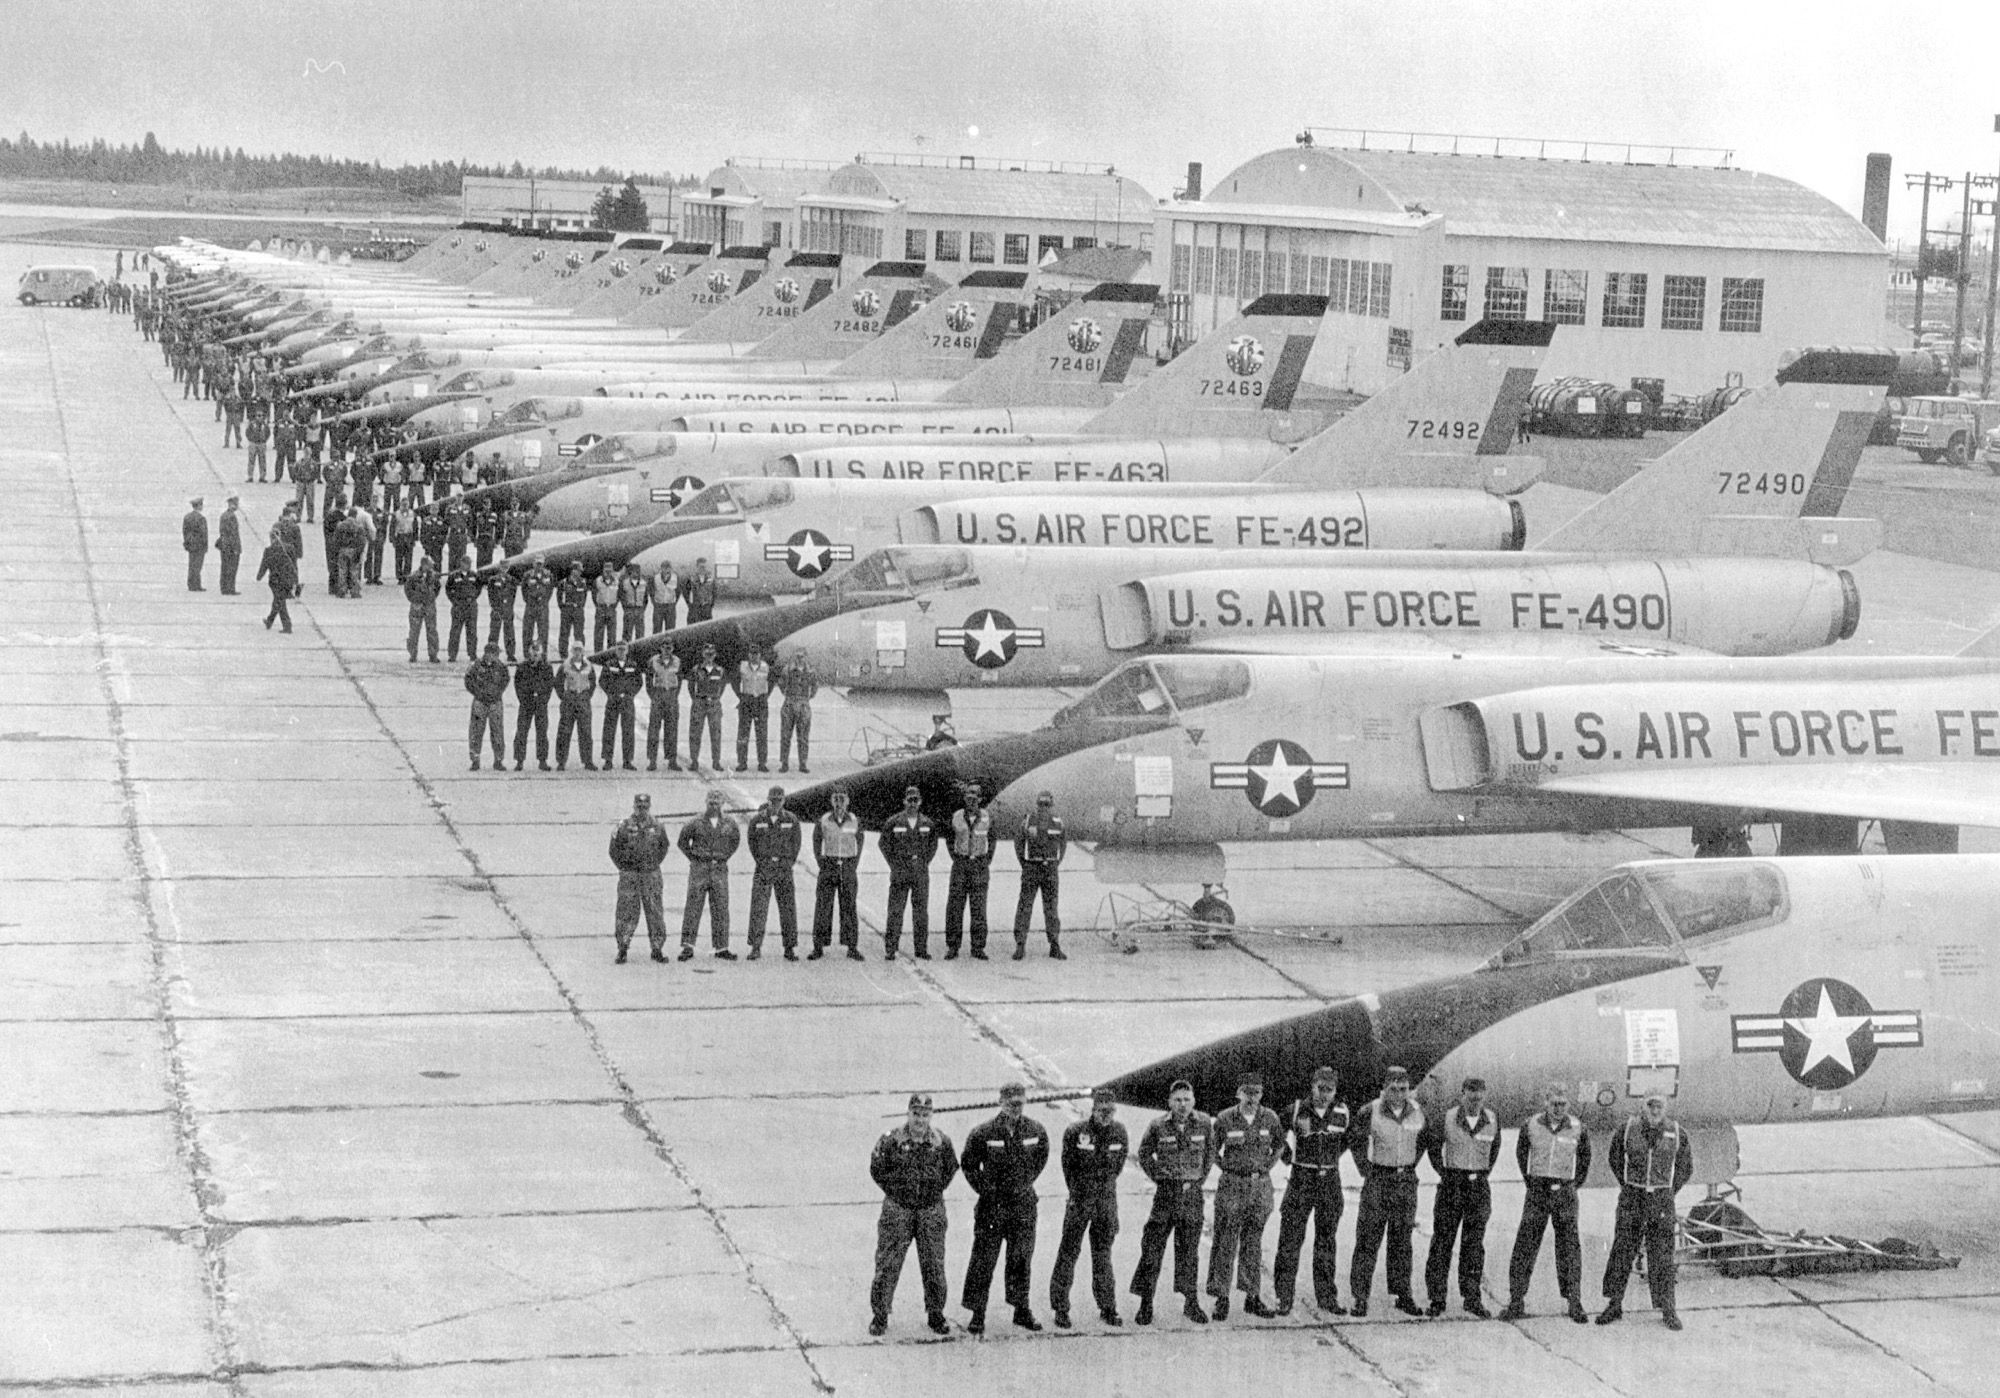 Many F-106s aircraft lined up at Spokane International Airport.